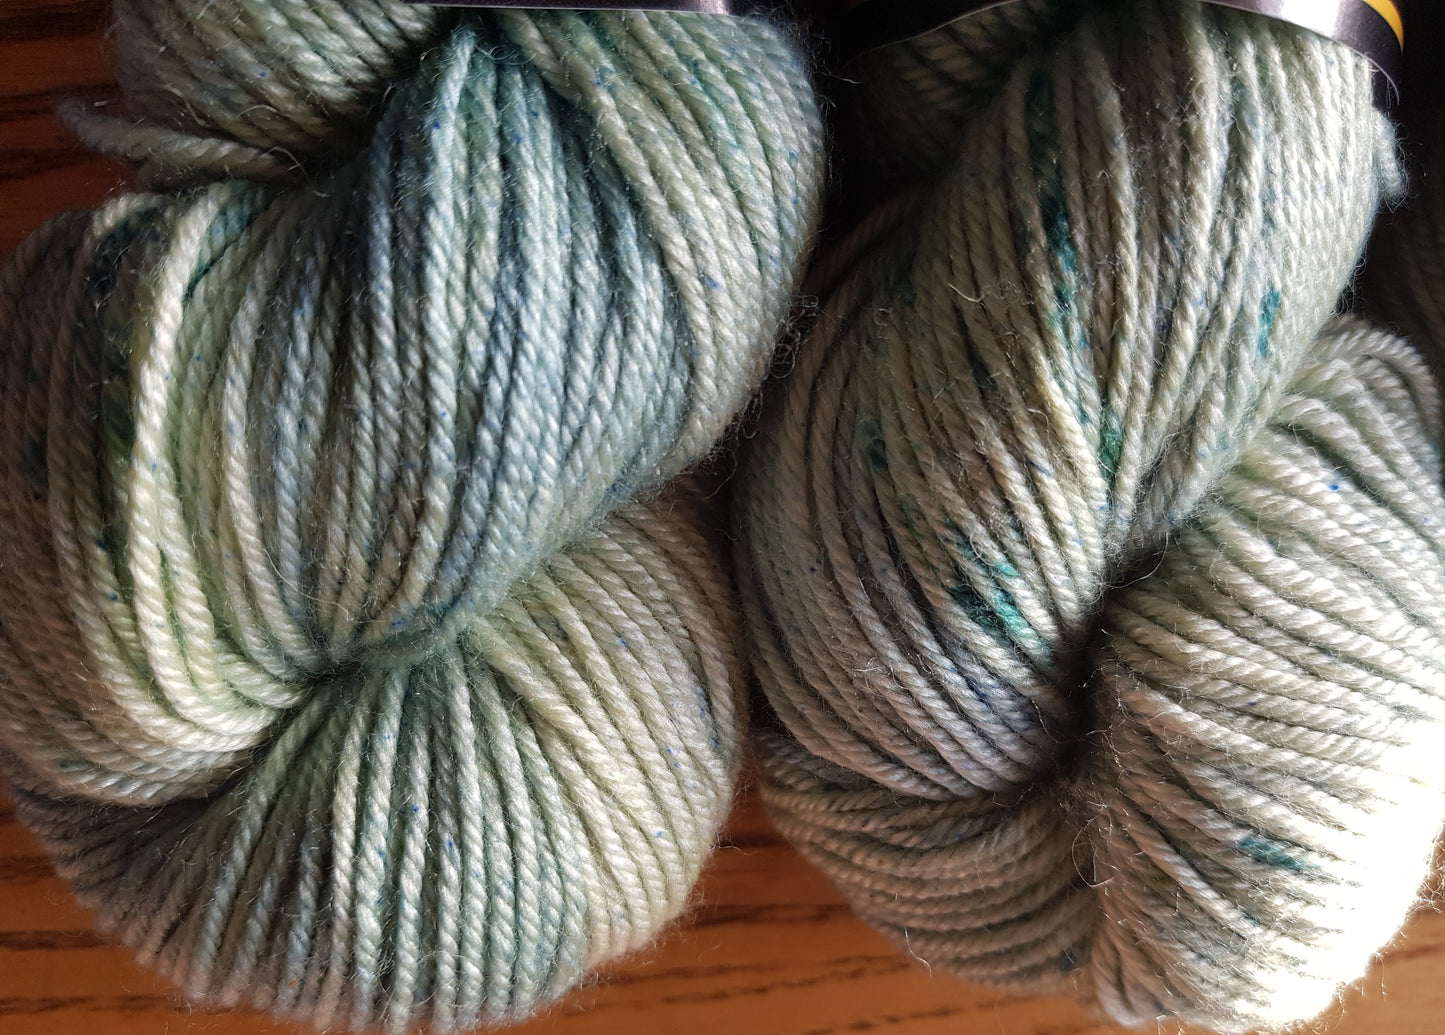 100G Bluefaced Leicester and silk hand dyed DK Weight Yarn- "Pounamu Jade"